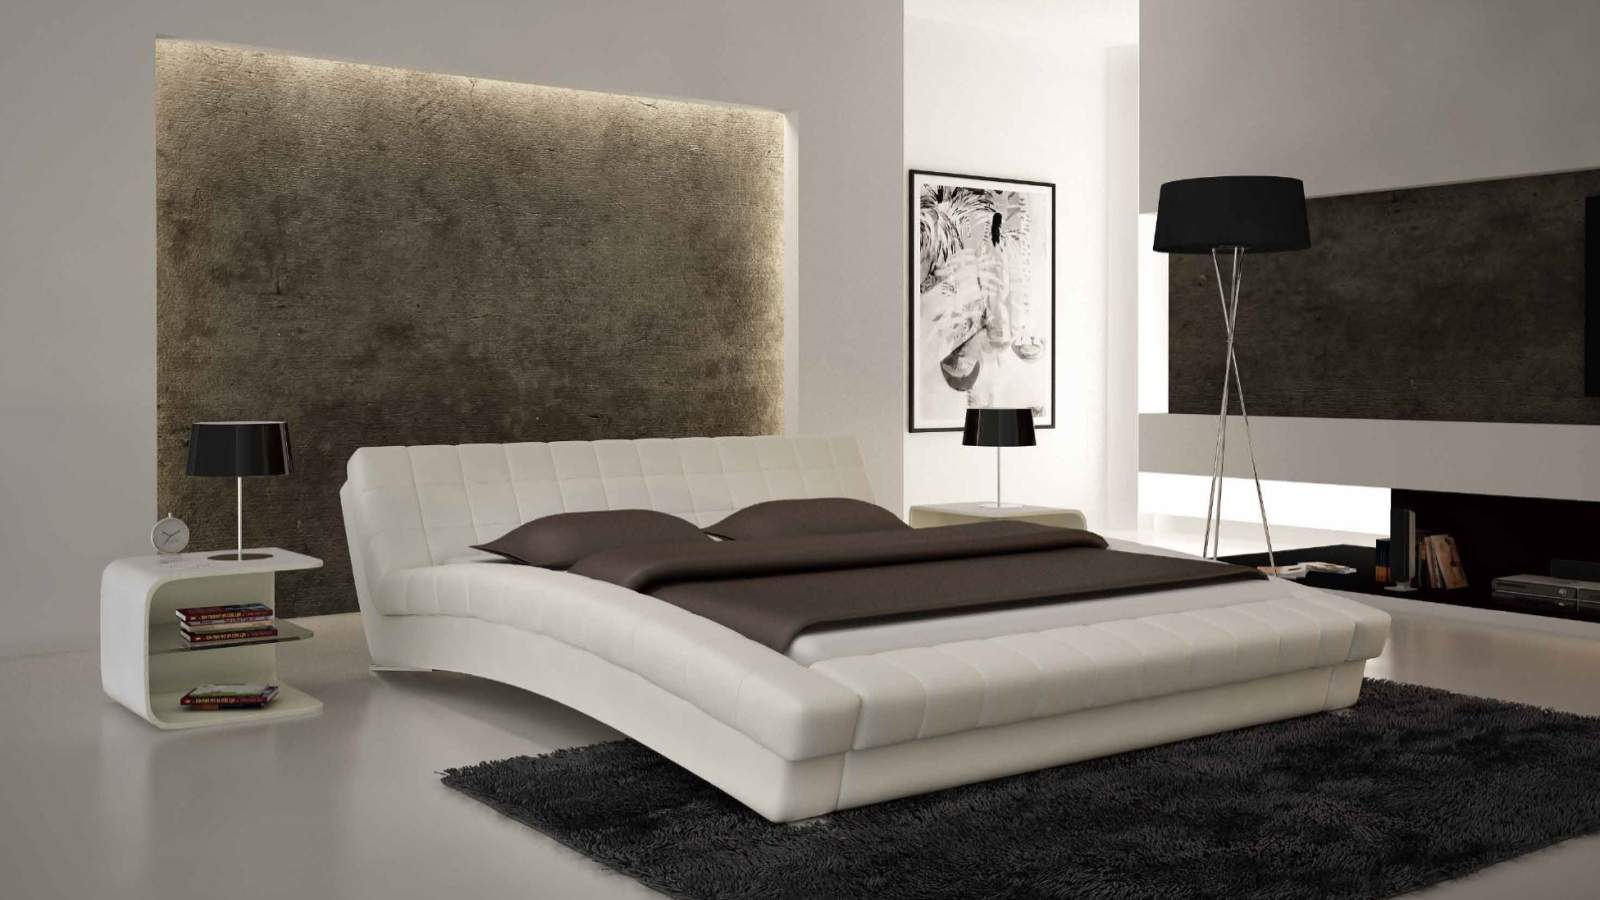 25 Amazing White Bedroom Furniture Ideas That Inspire You